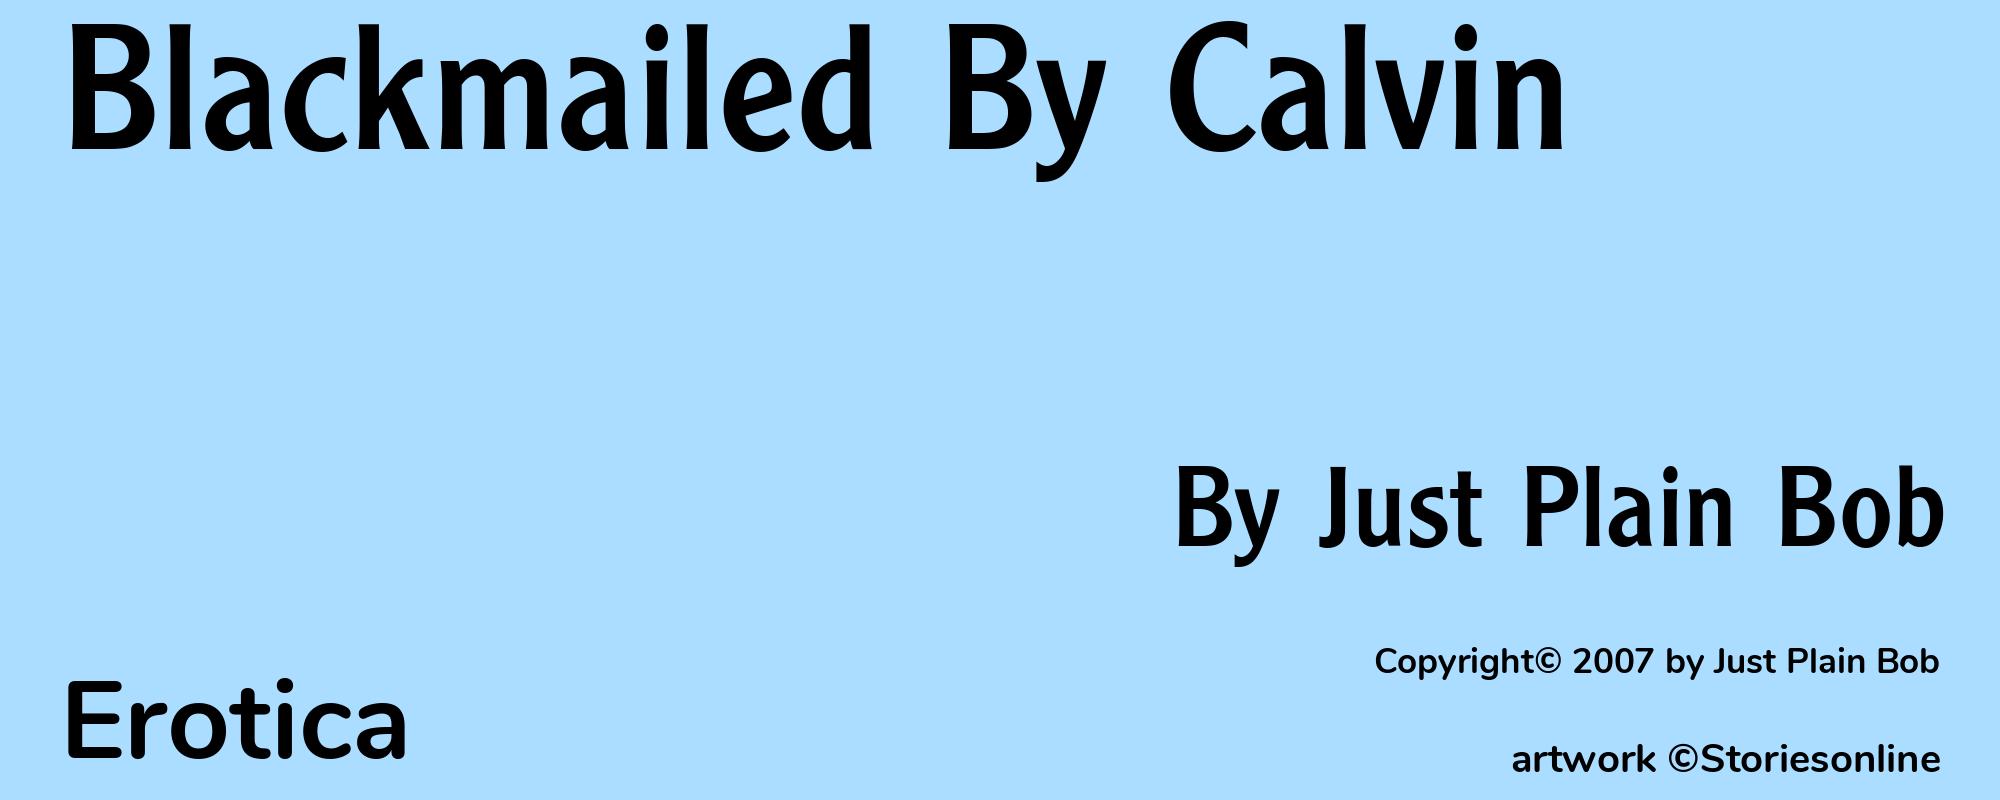 Blackmailed By Calvin - Cover